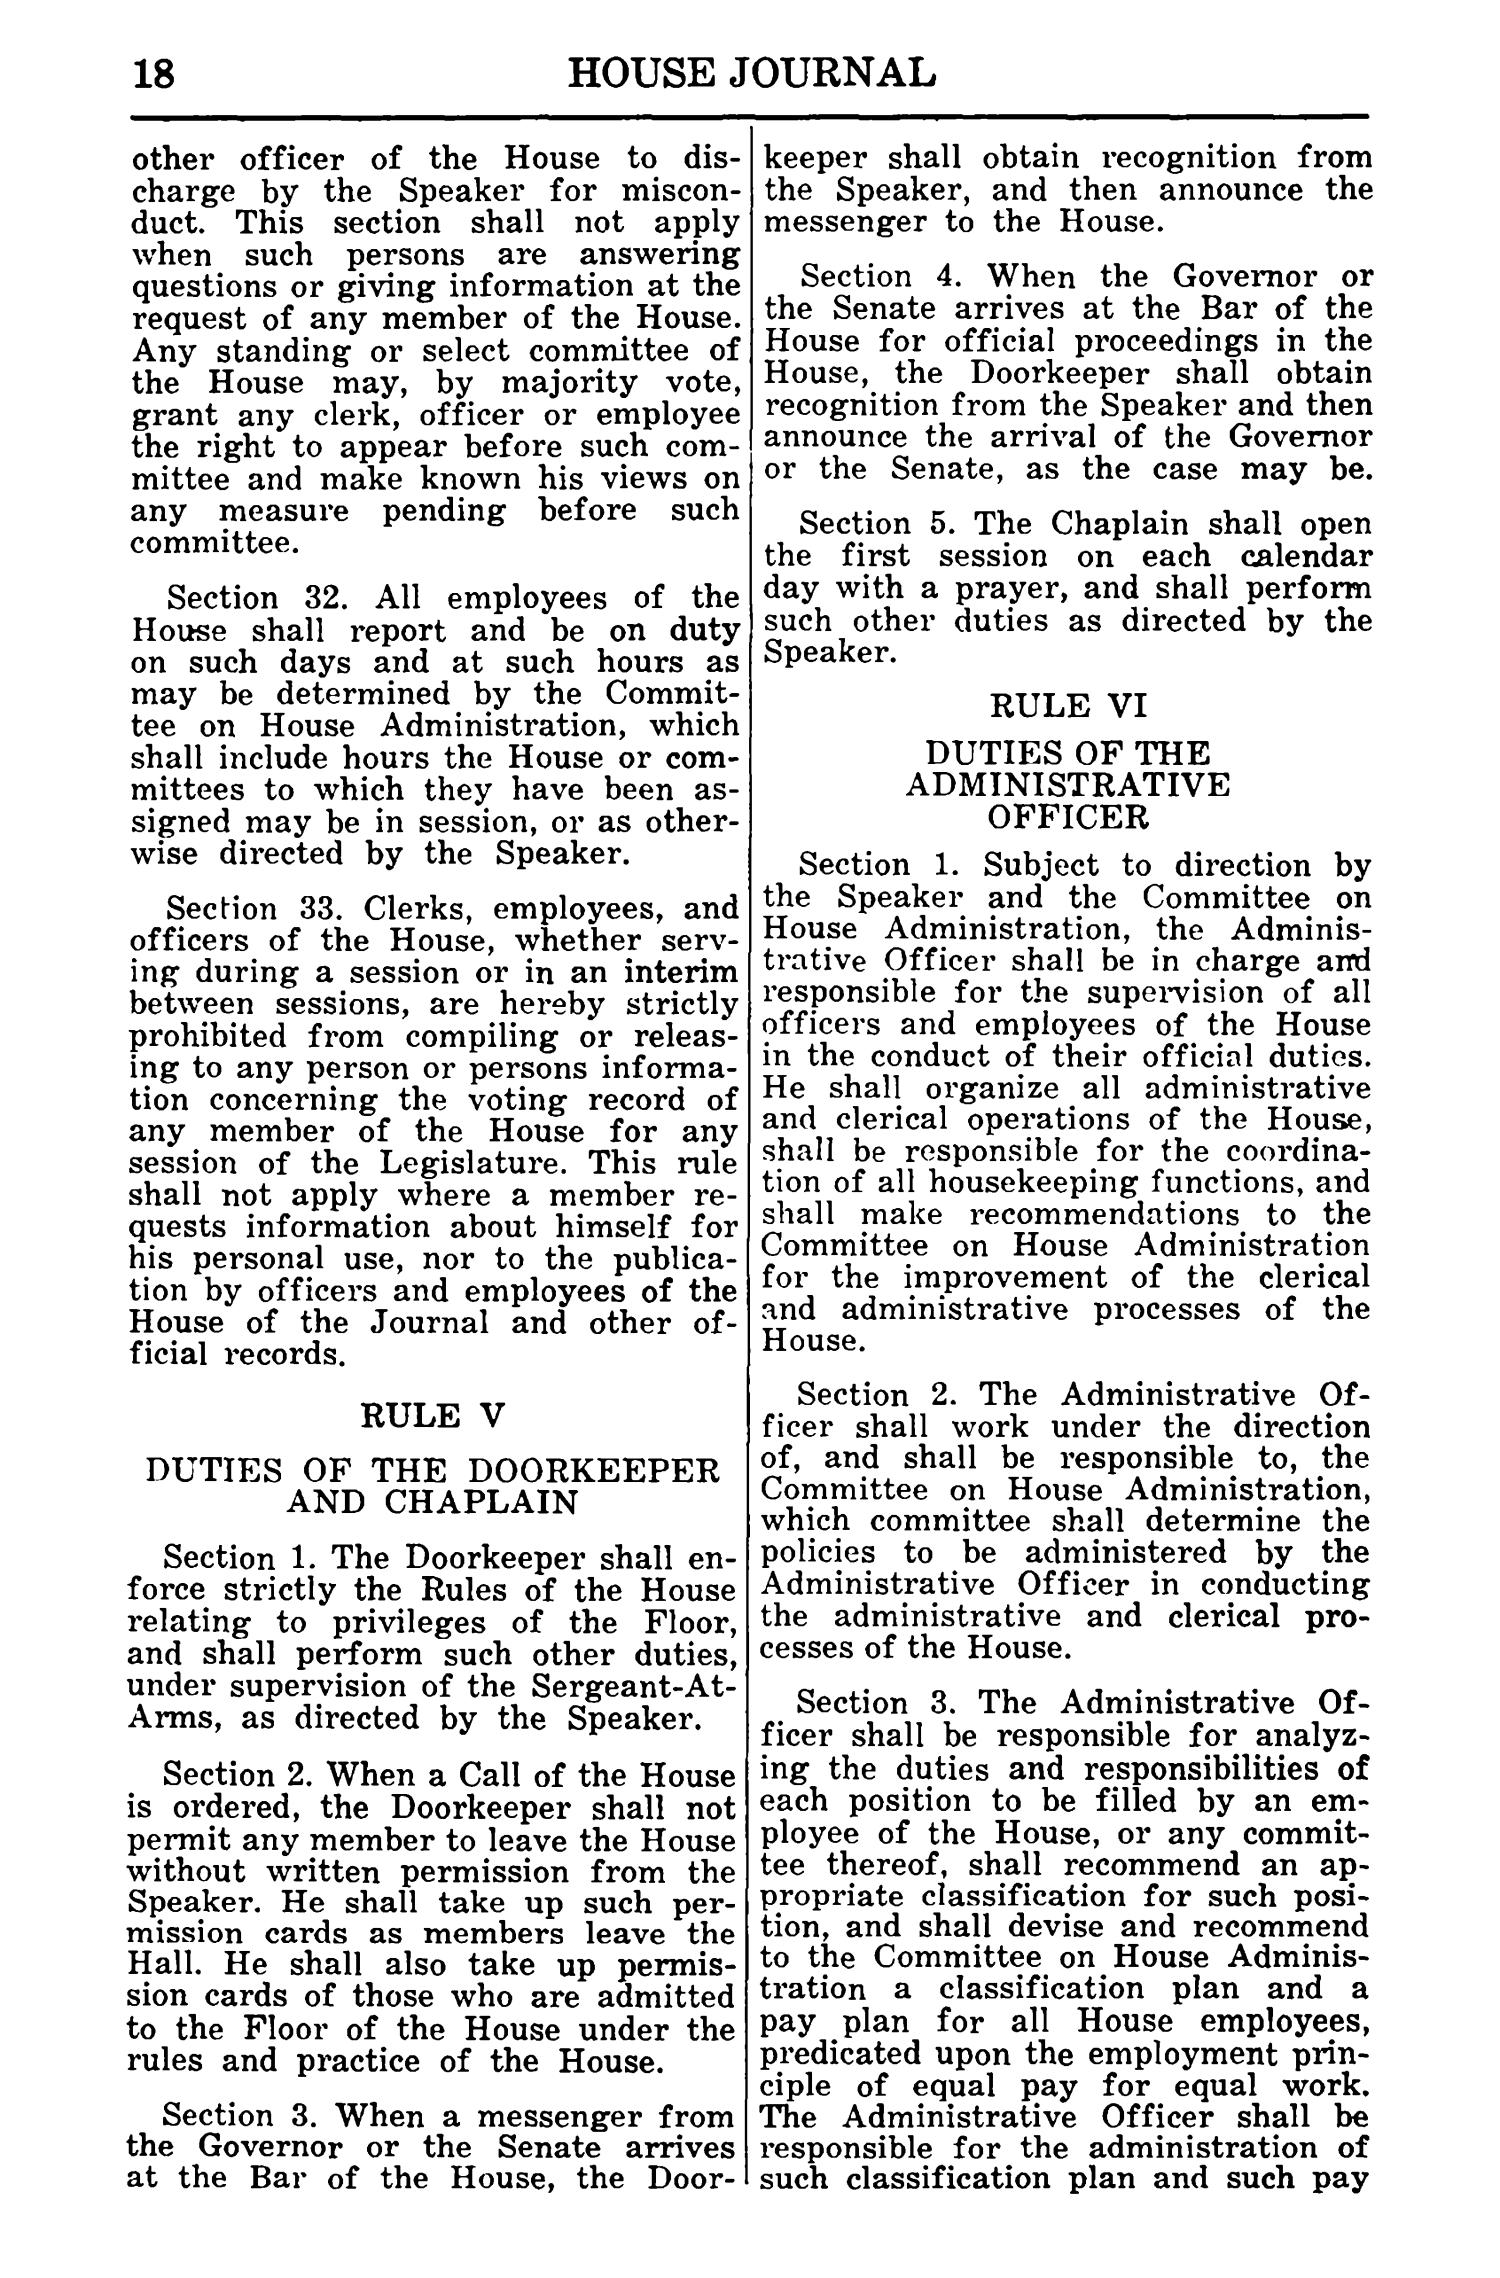 Journal of the House of Representatives of the Regular Session of the Sixtieth Legislature of the State of Texas, Volume 1
                                                
                                                    18
                                                